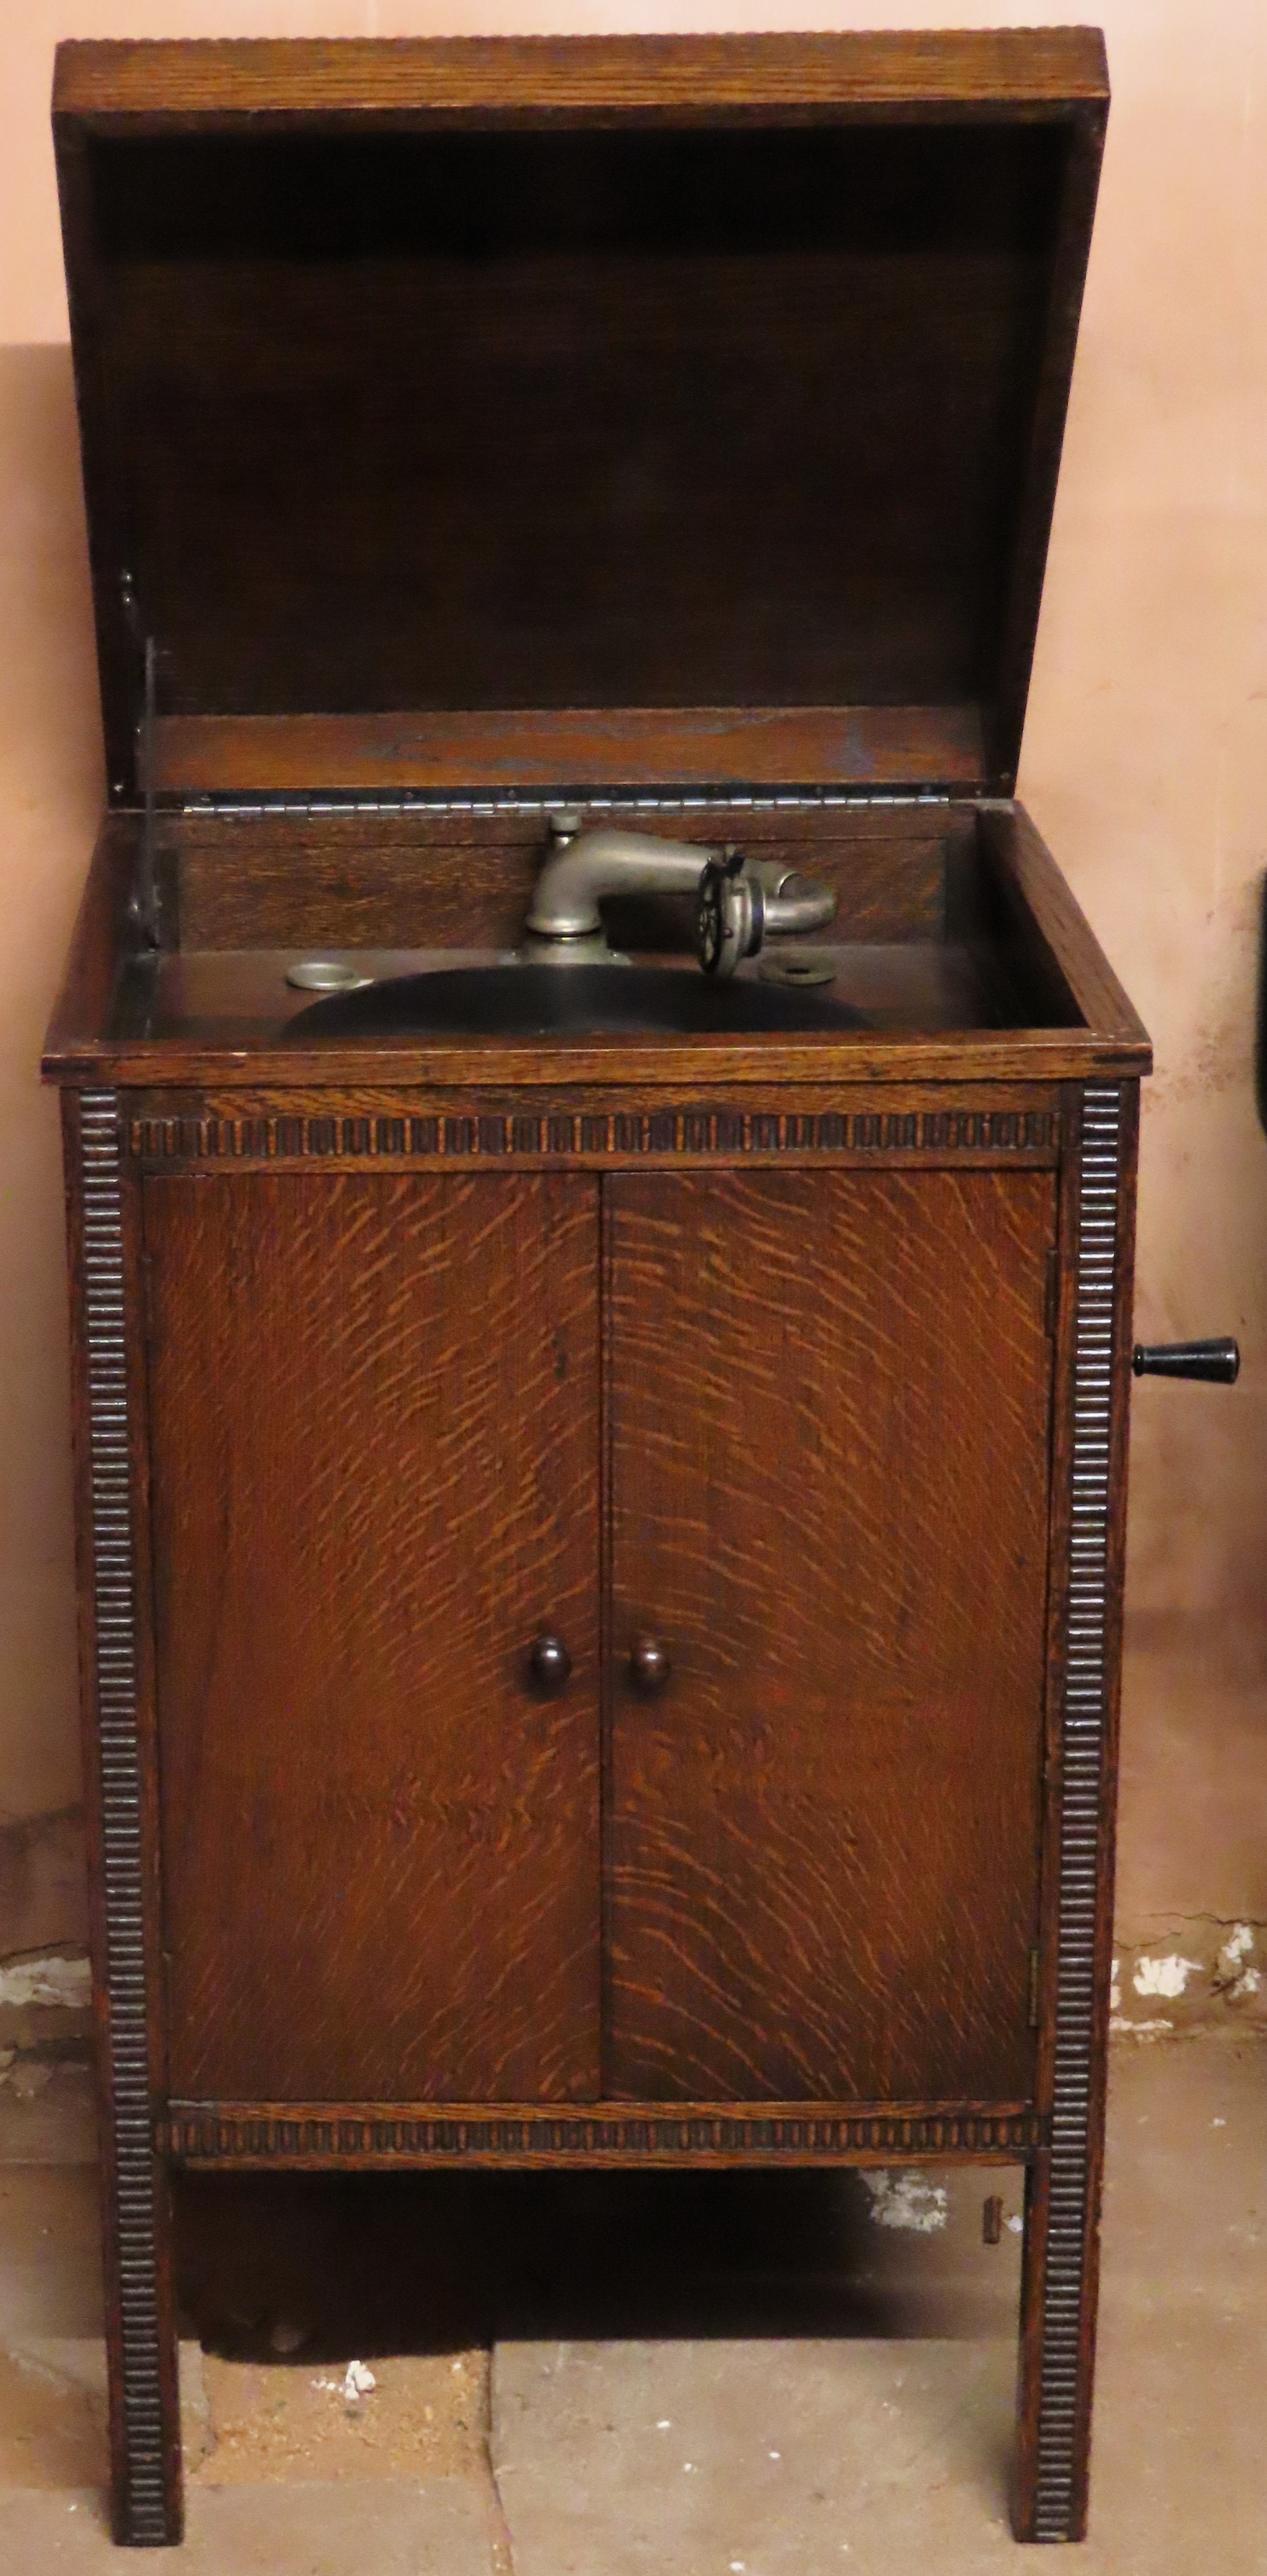 Early 20th century oak cased gramaphone. Approx. 82cm H x 69cm W x 49cm D Used condition, scuffs and